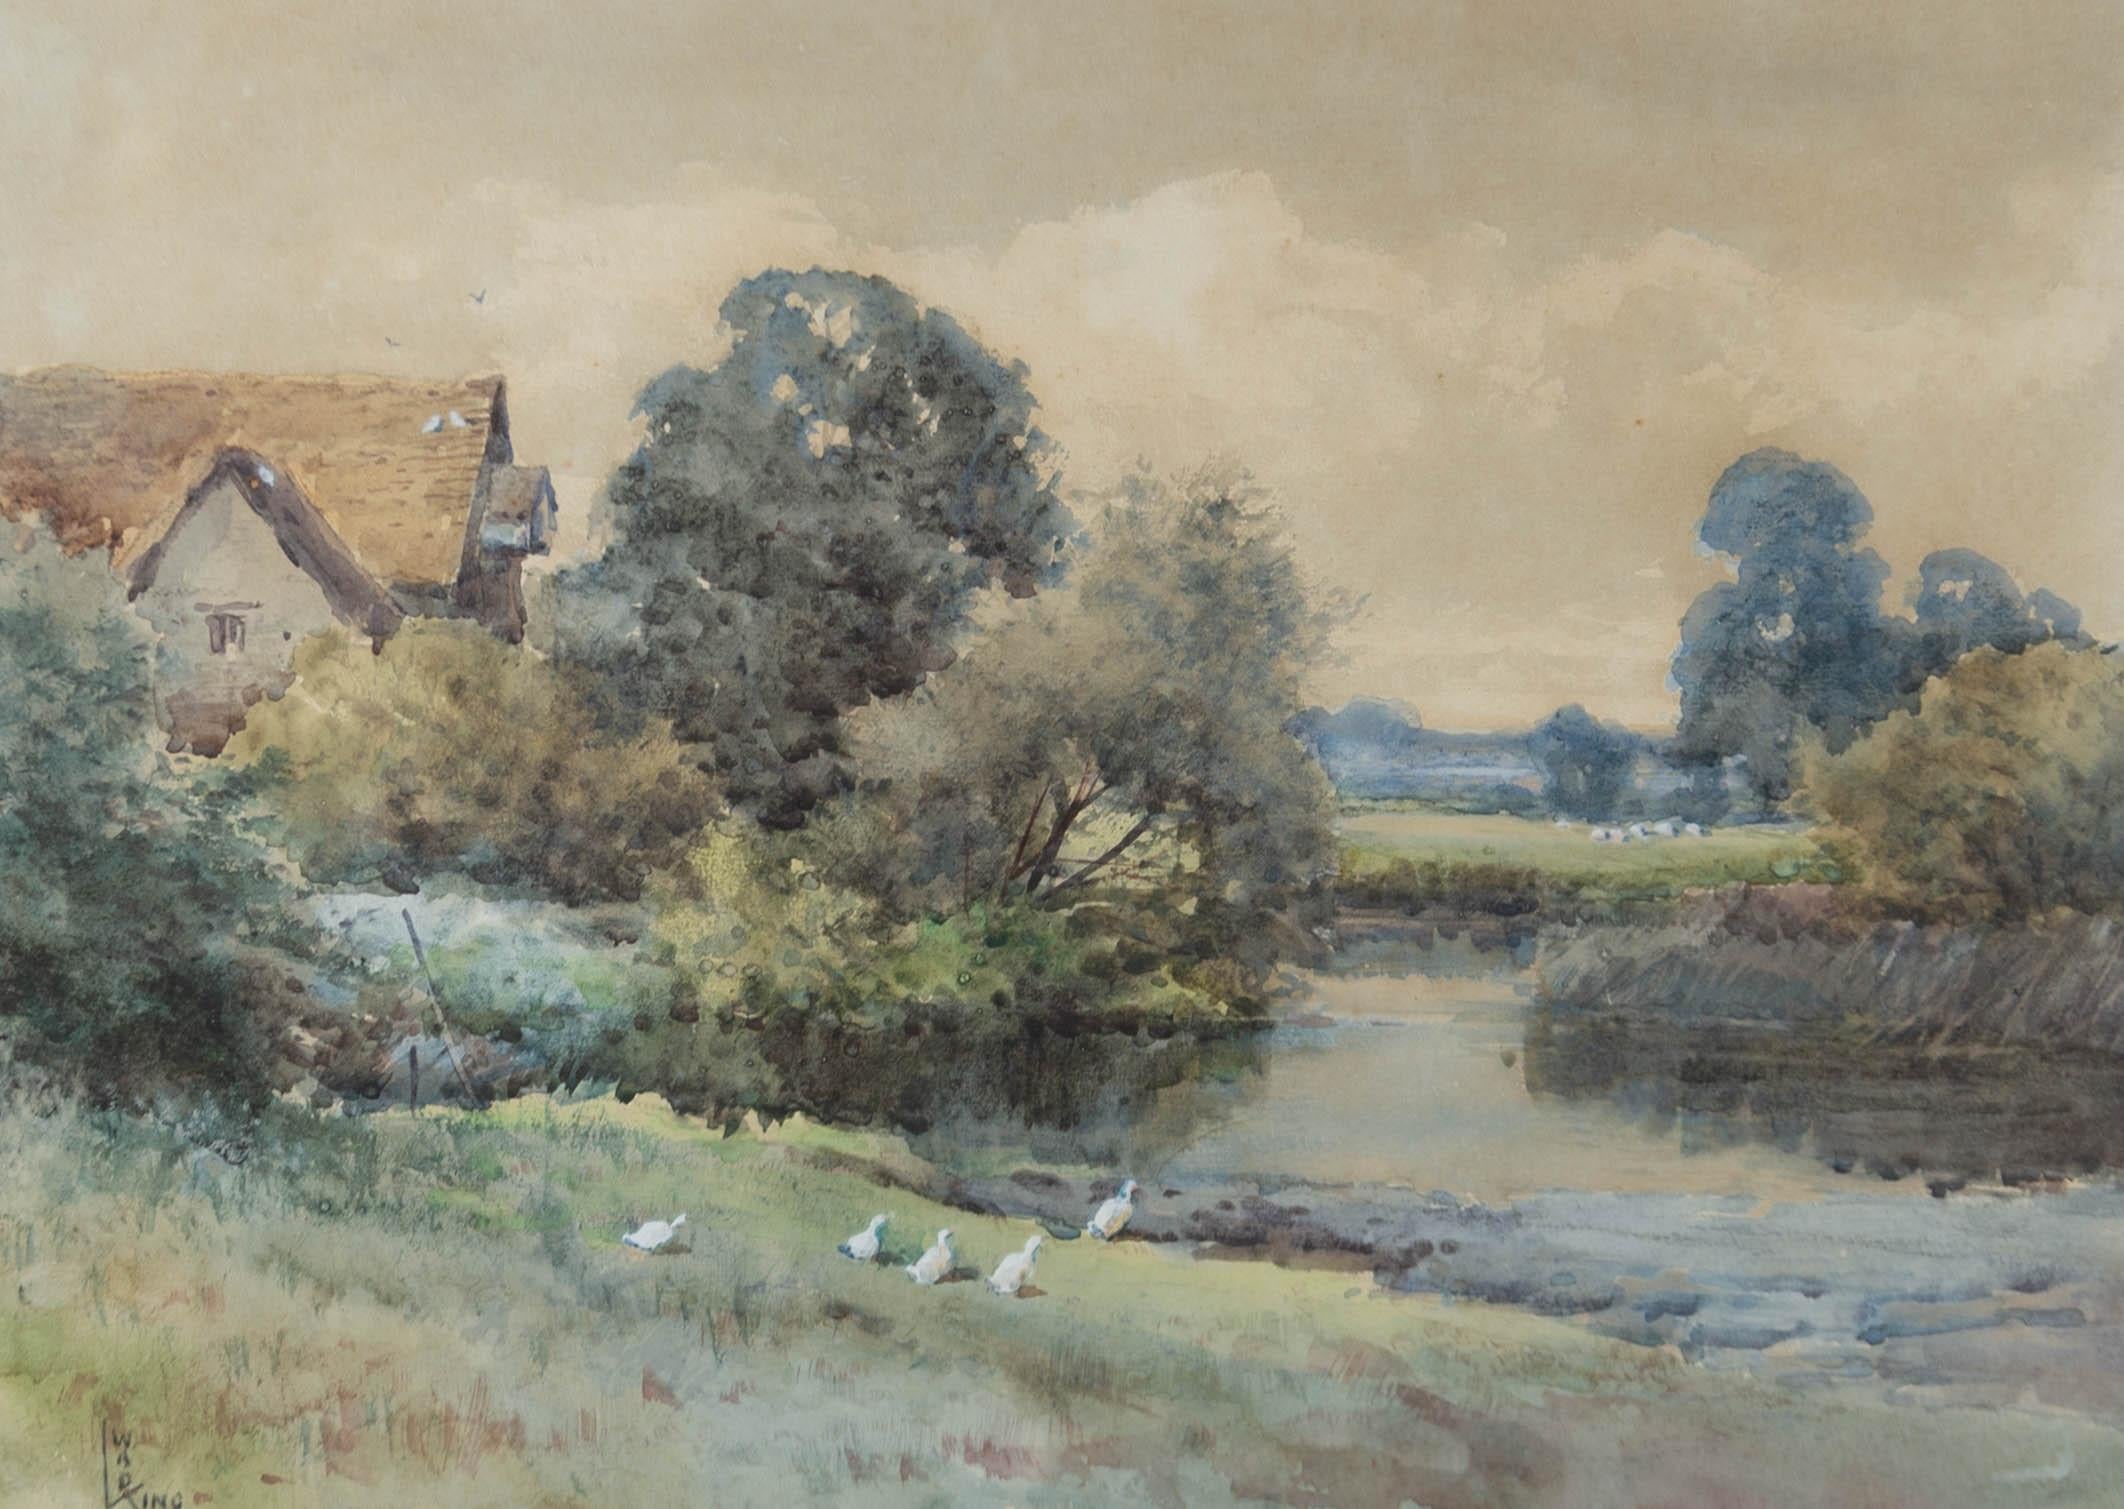 W.A.D. King - Early 20th Century Watercolour, Ducks by the River 1